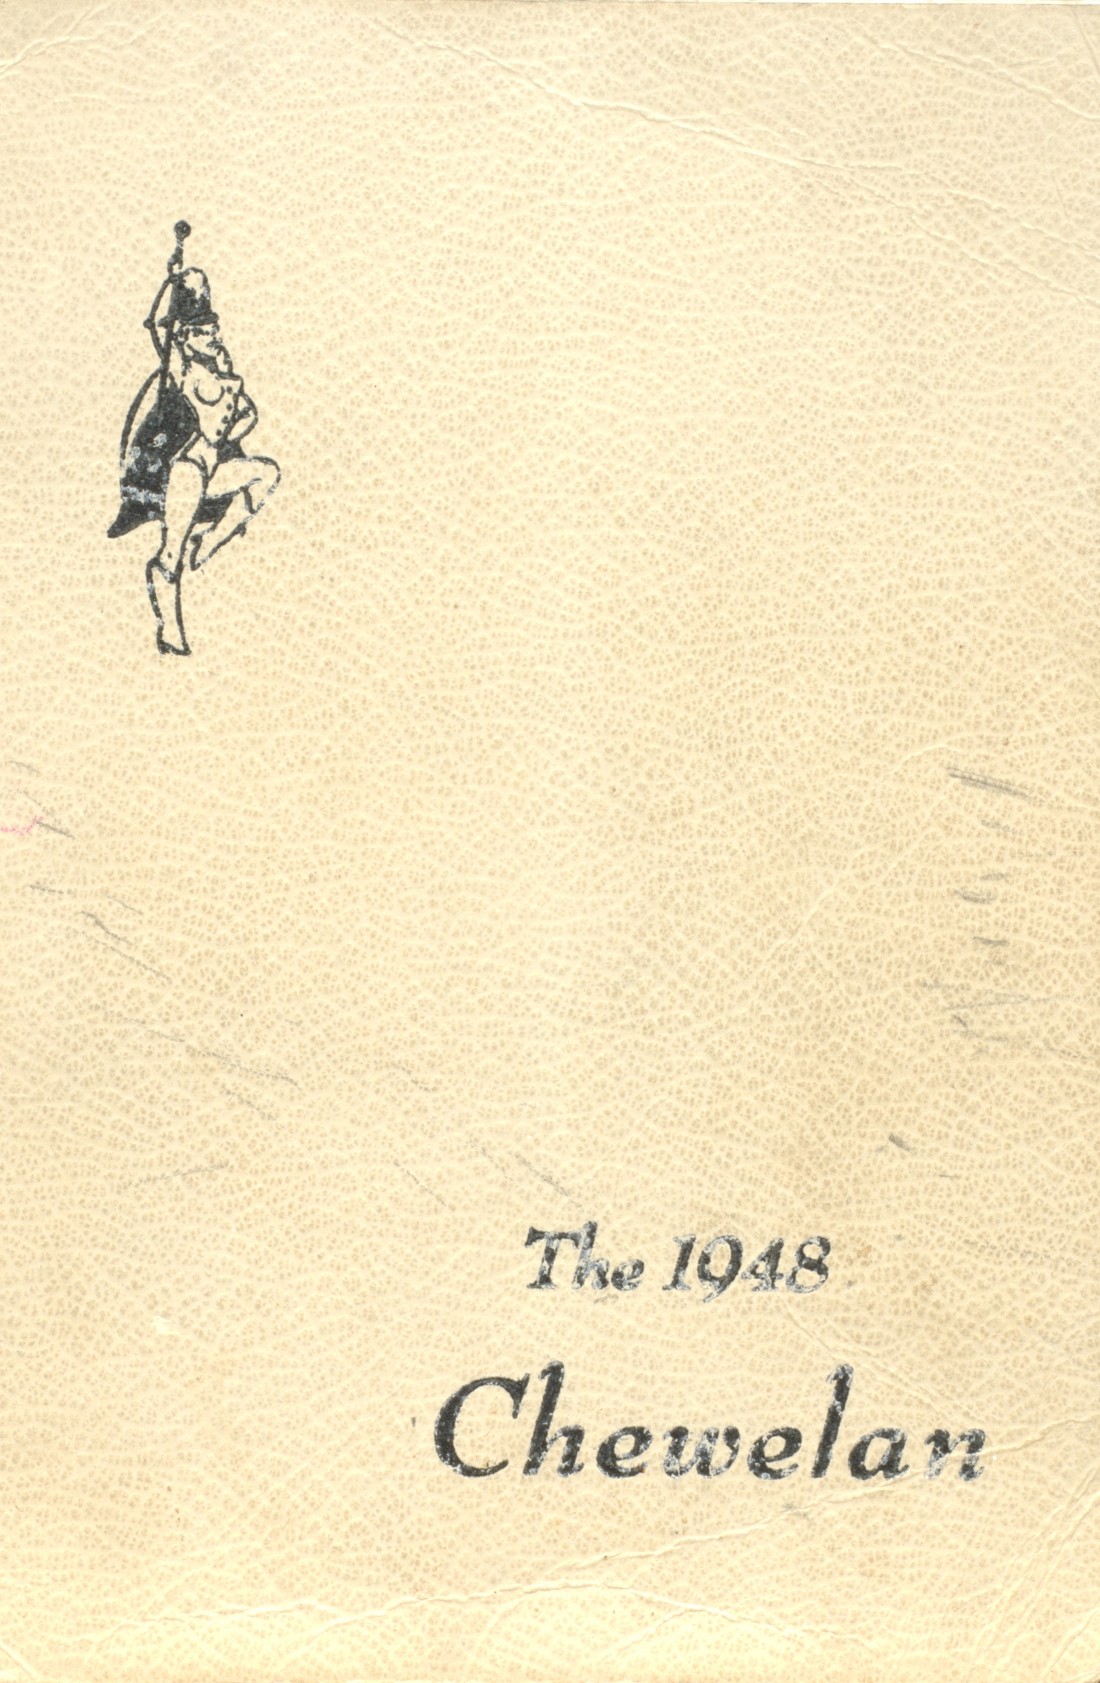 1948 Yearbook From Jenkins High School From Chewelah Washington